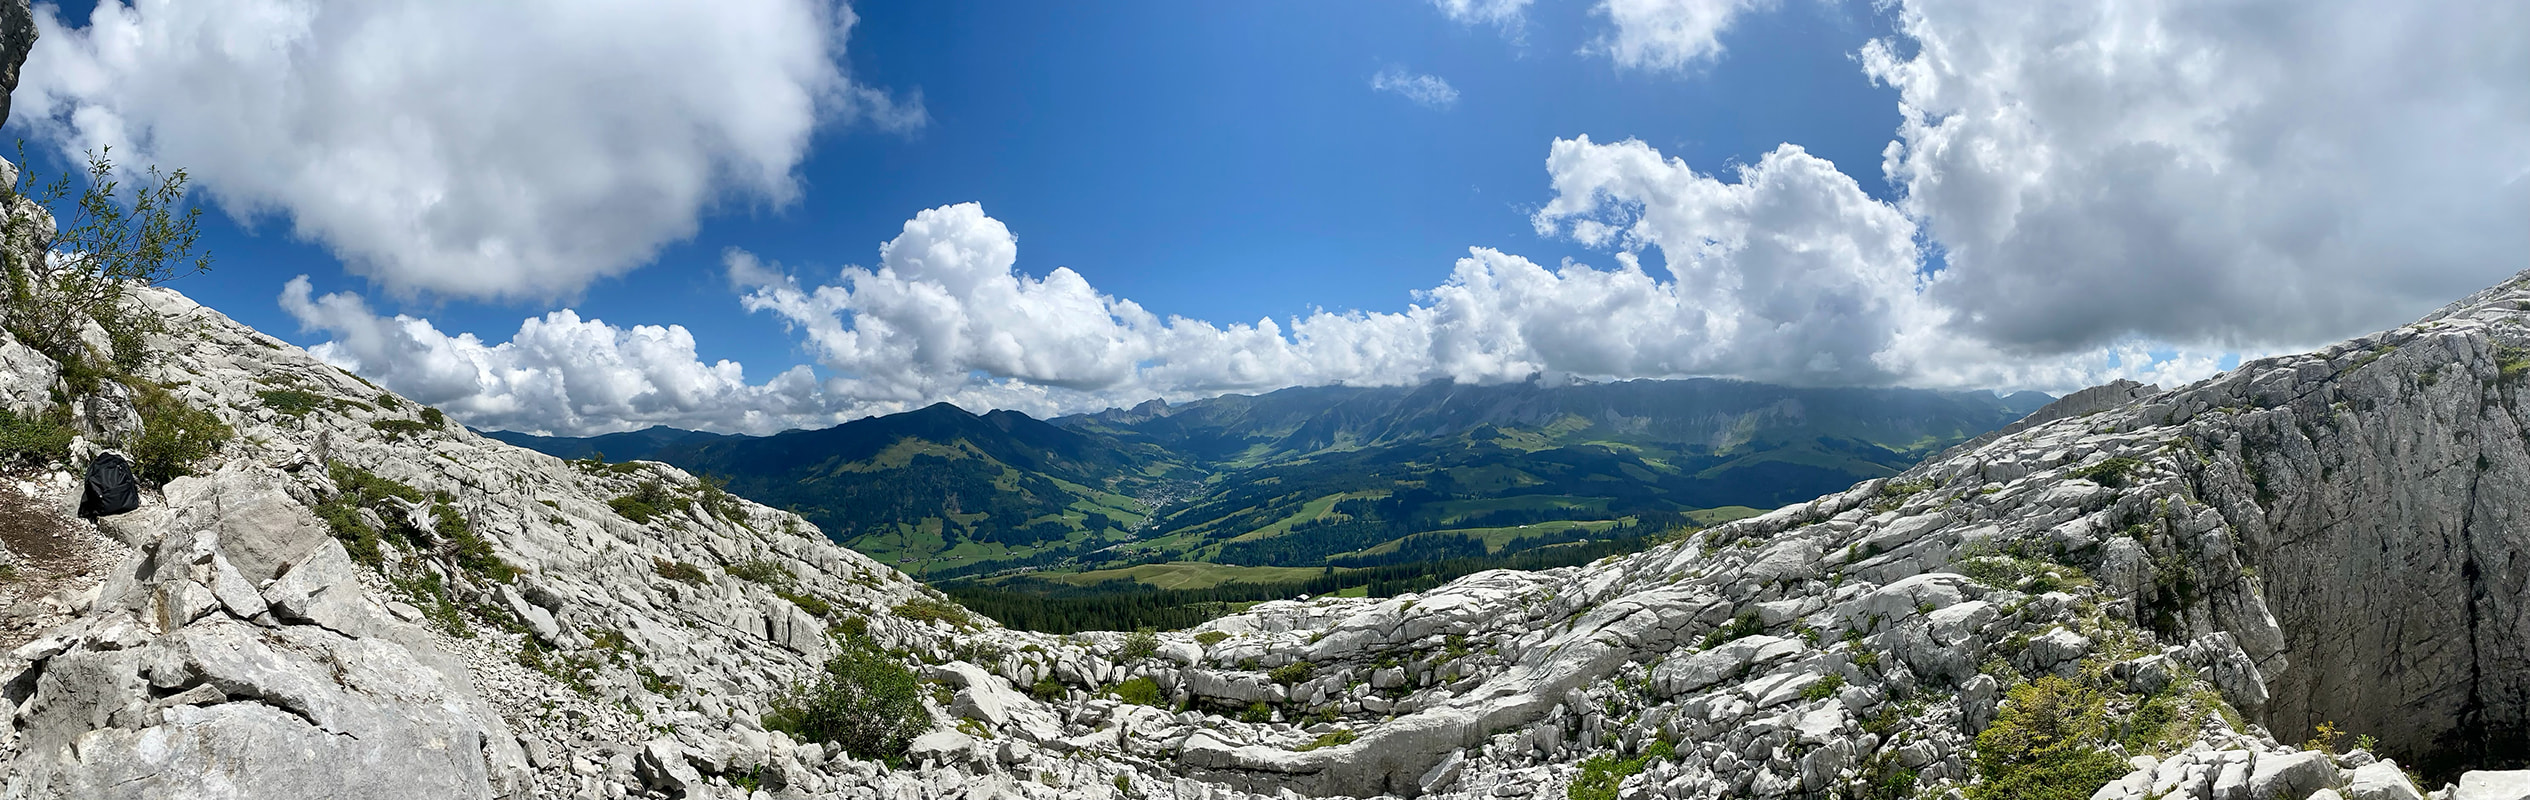 The Schrattenfluh is a wildly rugged rocky outcrop in the Swiss Pre-Alps